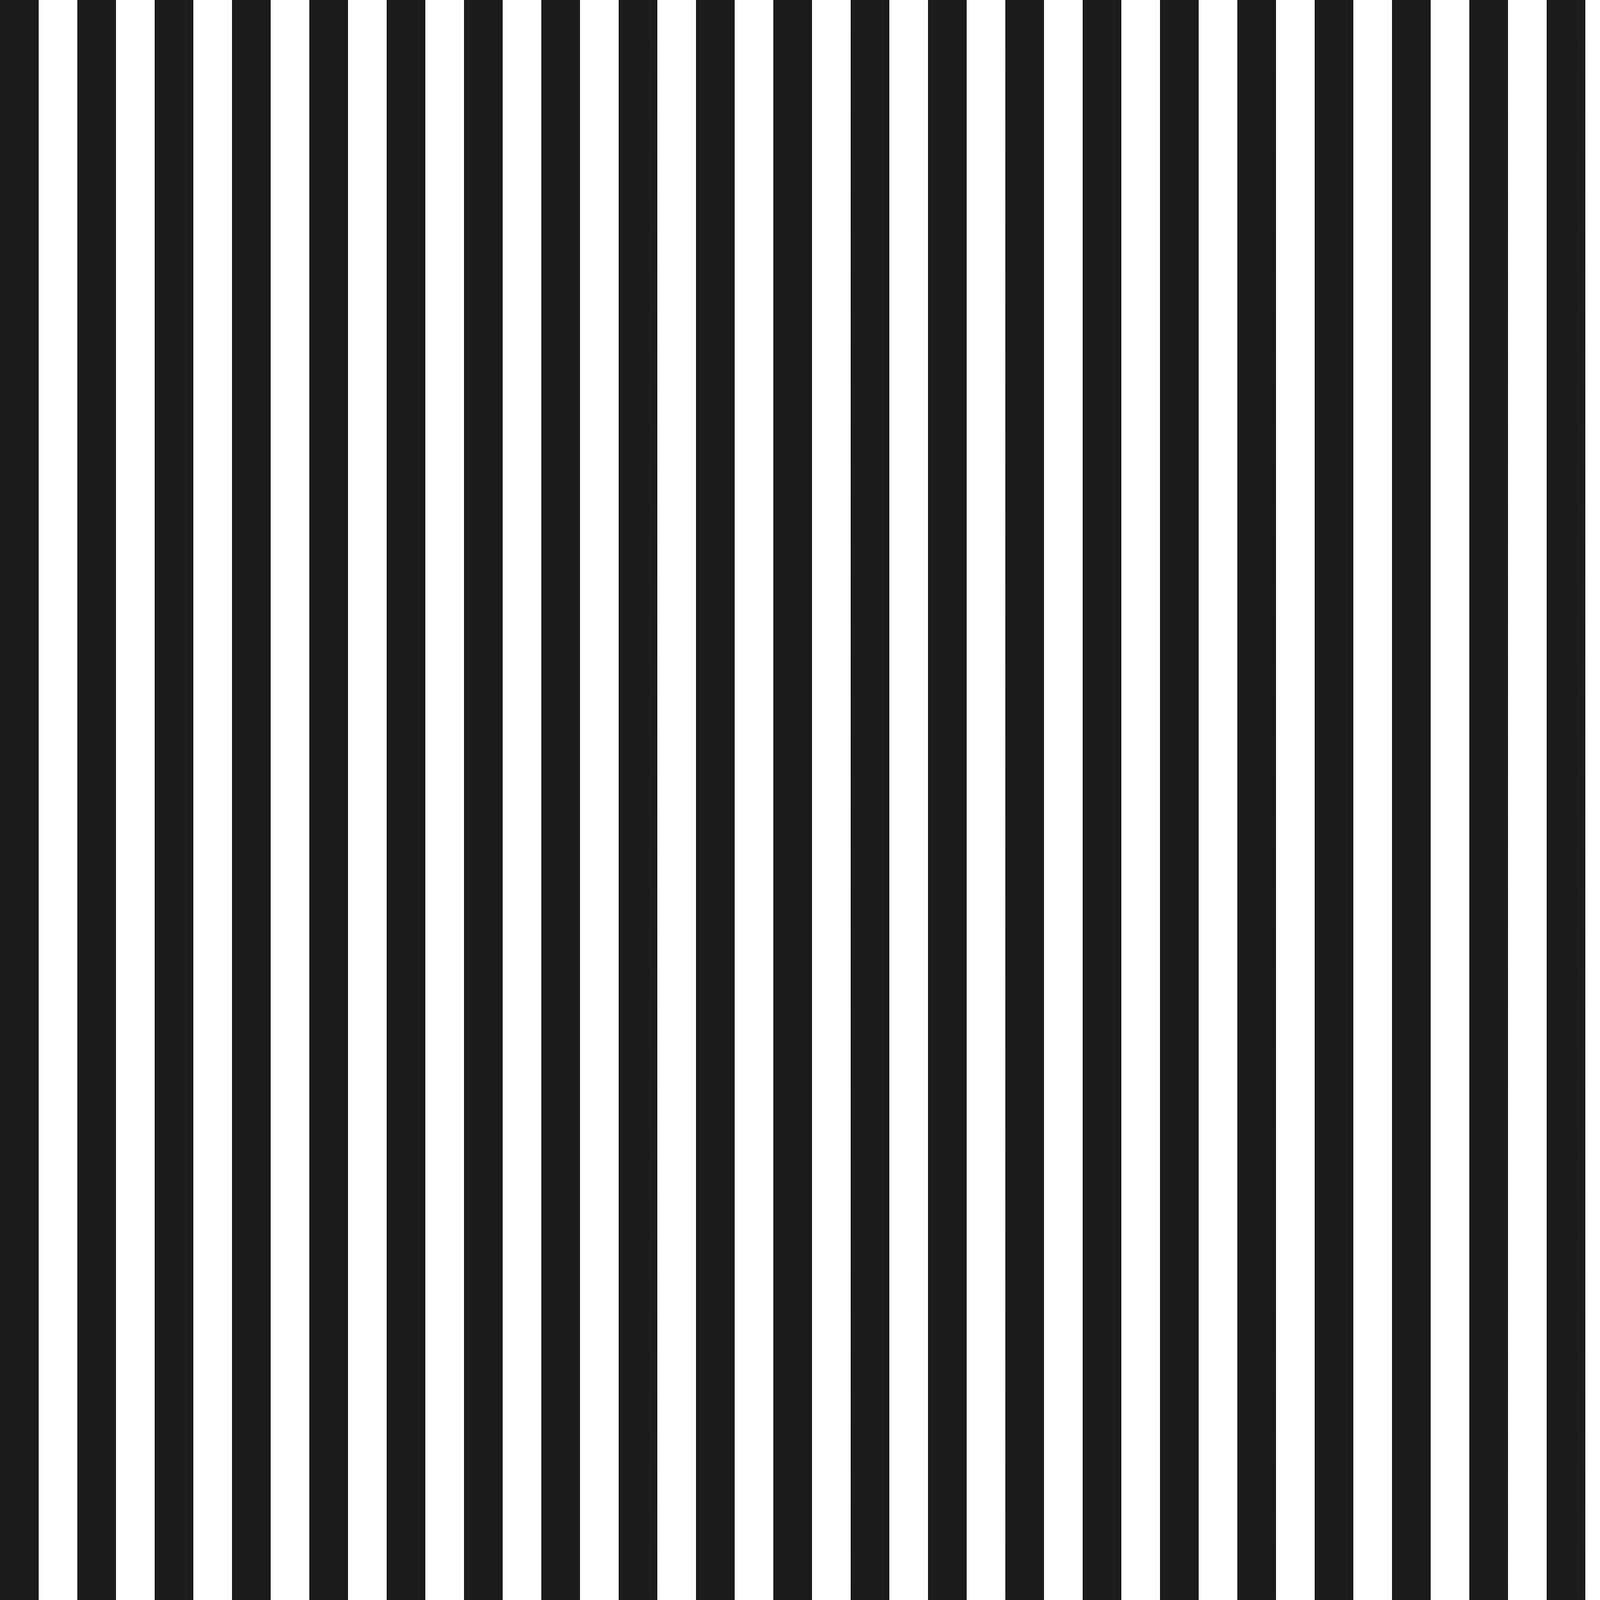 computer screen black and white stripes